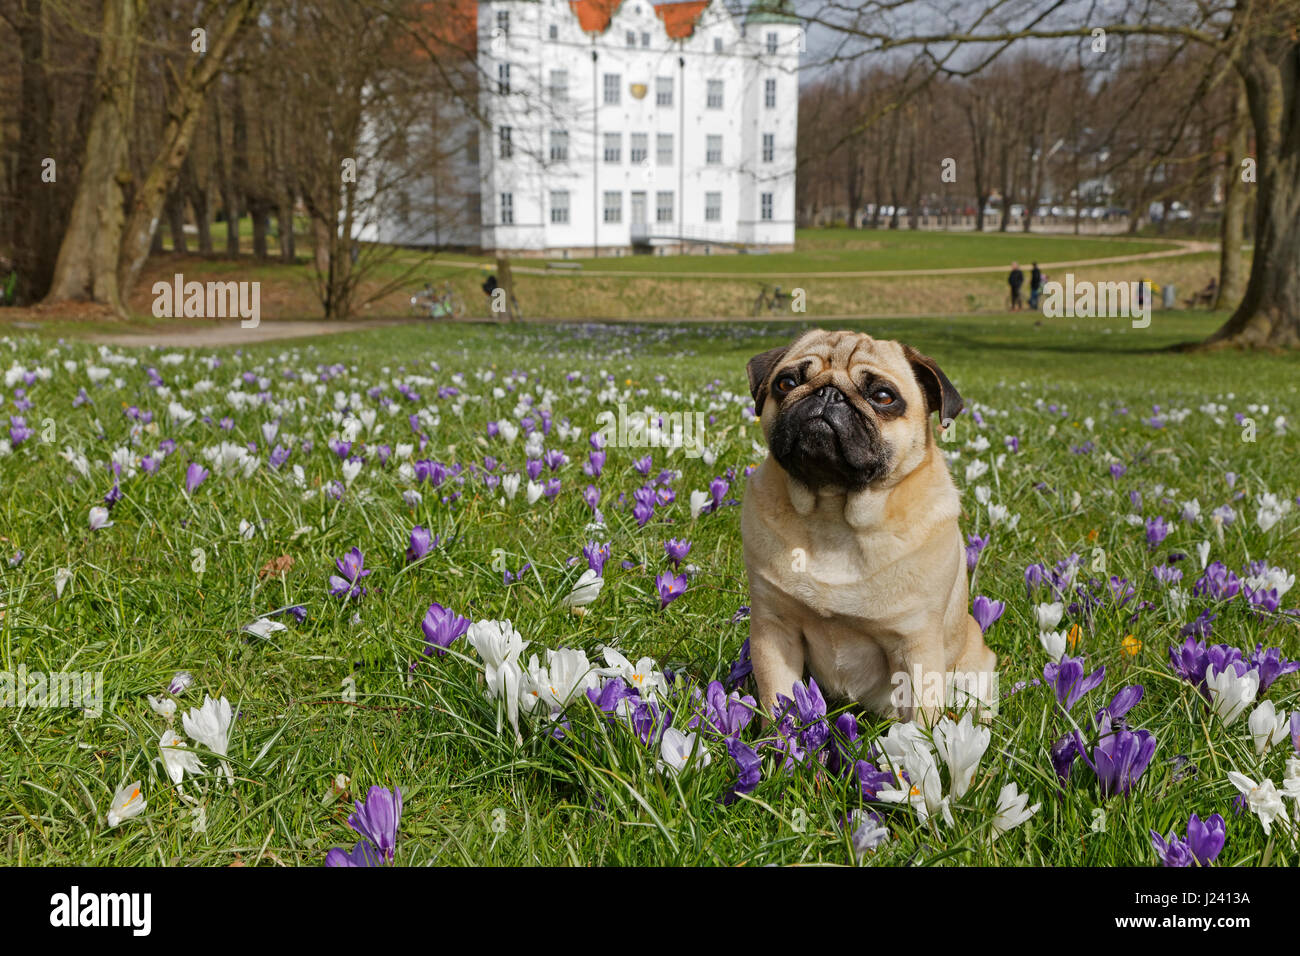 Pug dog sitting on a meadow with crocus, Schleswig Holstein, Germany, Europe Stock Photo